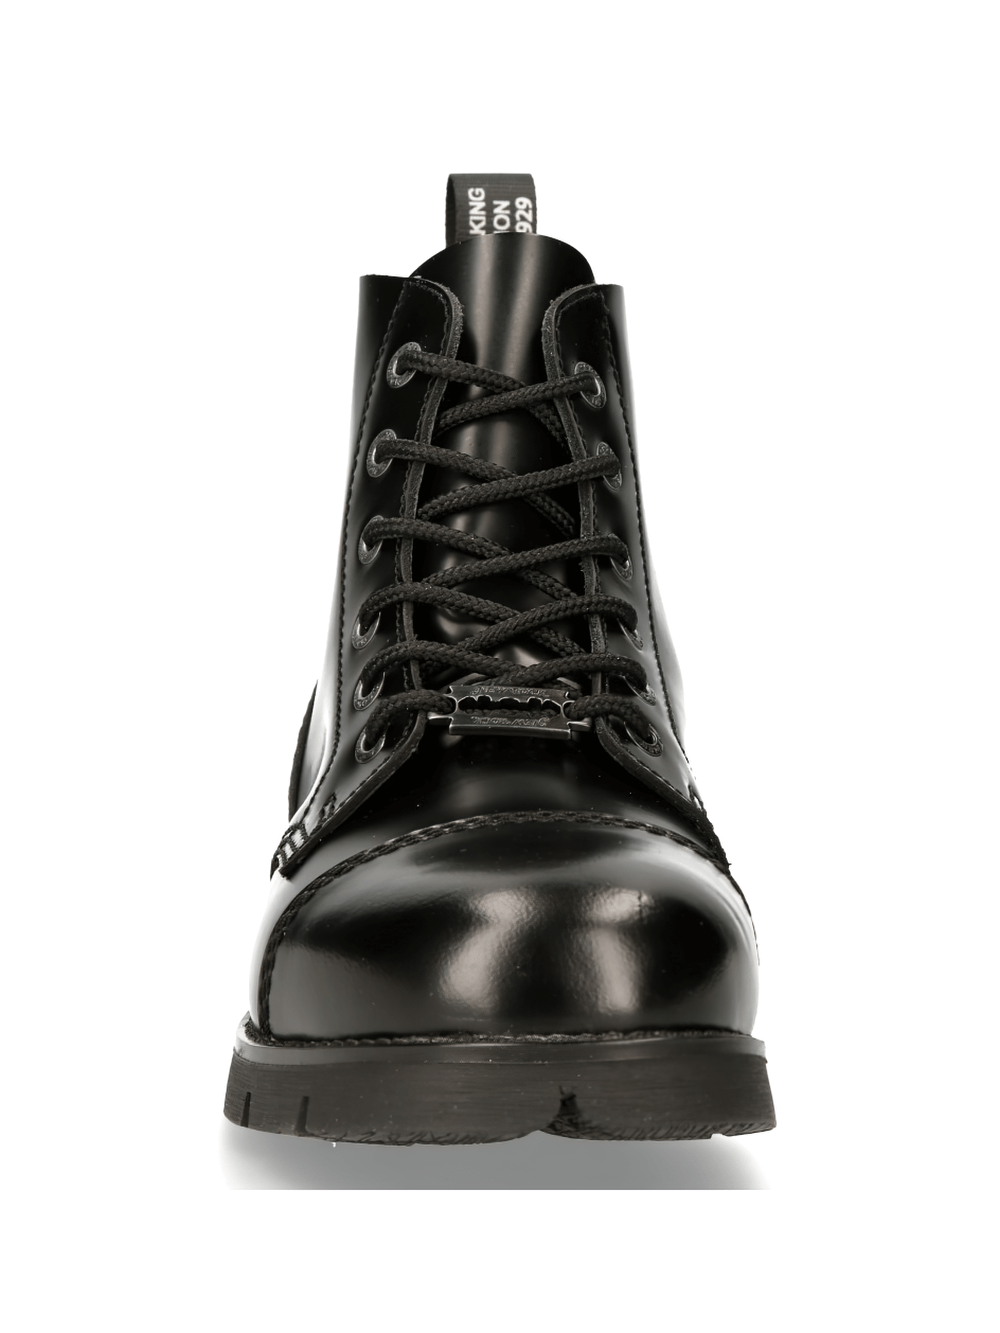 NEW ROCK Urban Heavy Lace-Up Black Ankle Boots